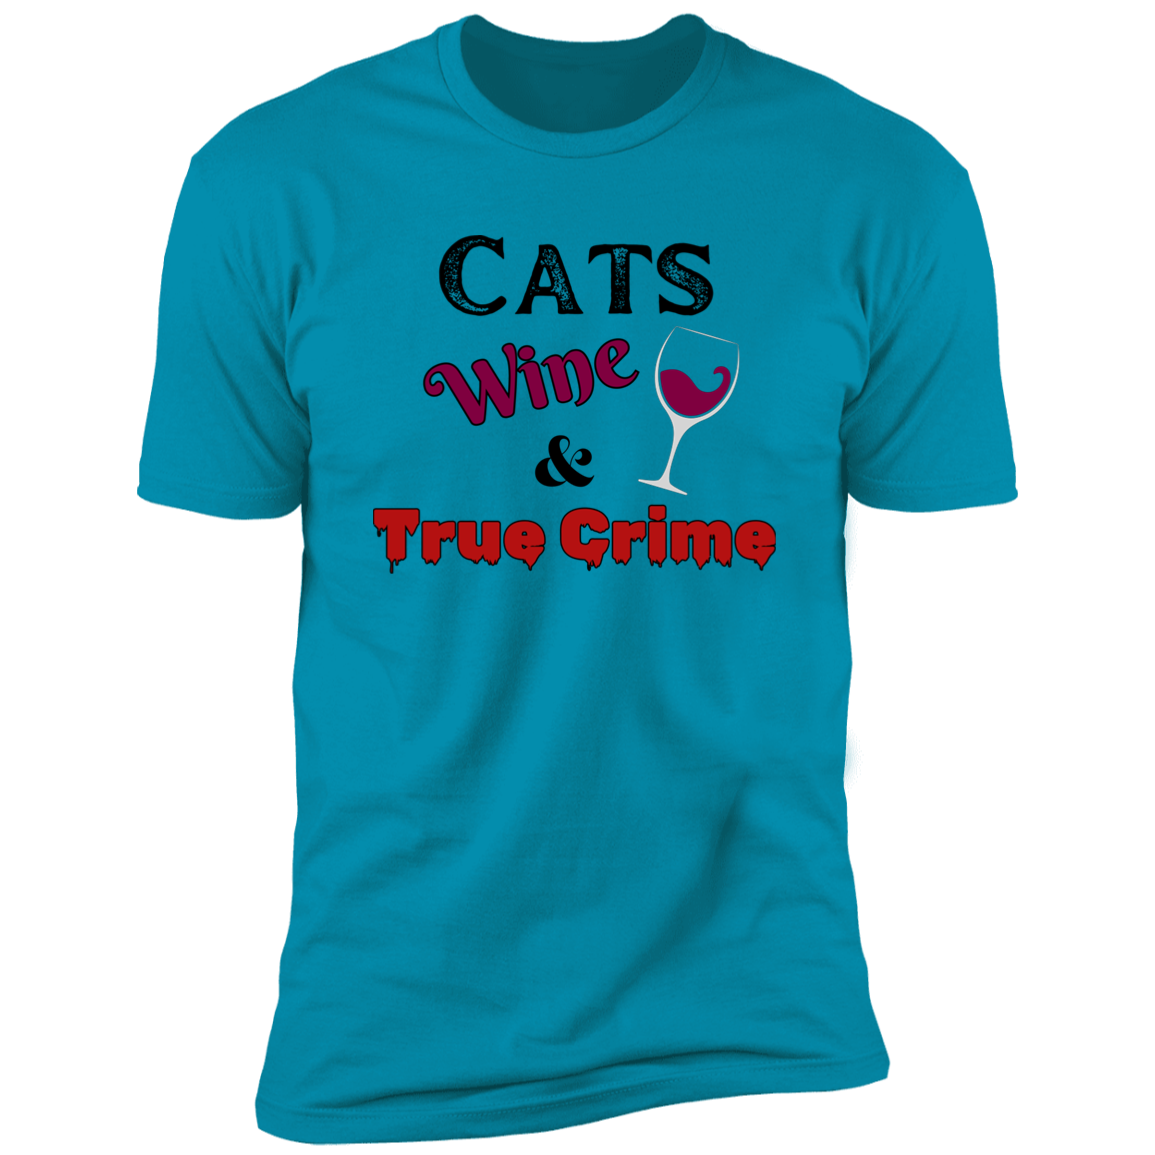 Cats Wine & True Crime T-shirt, Cat shirt for humans, funny cat shirt, in turquoise 